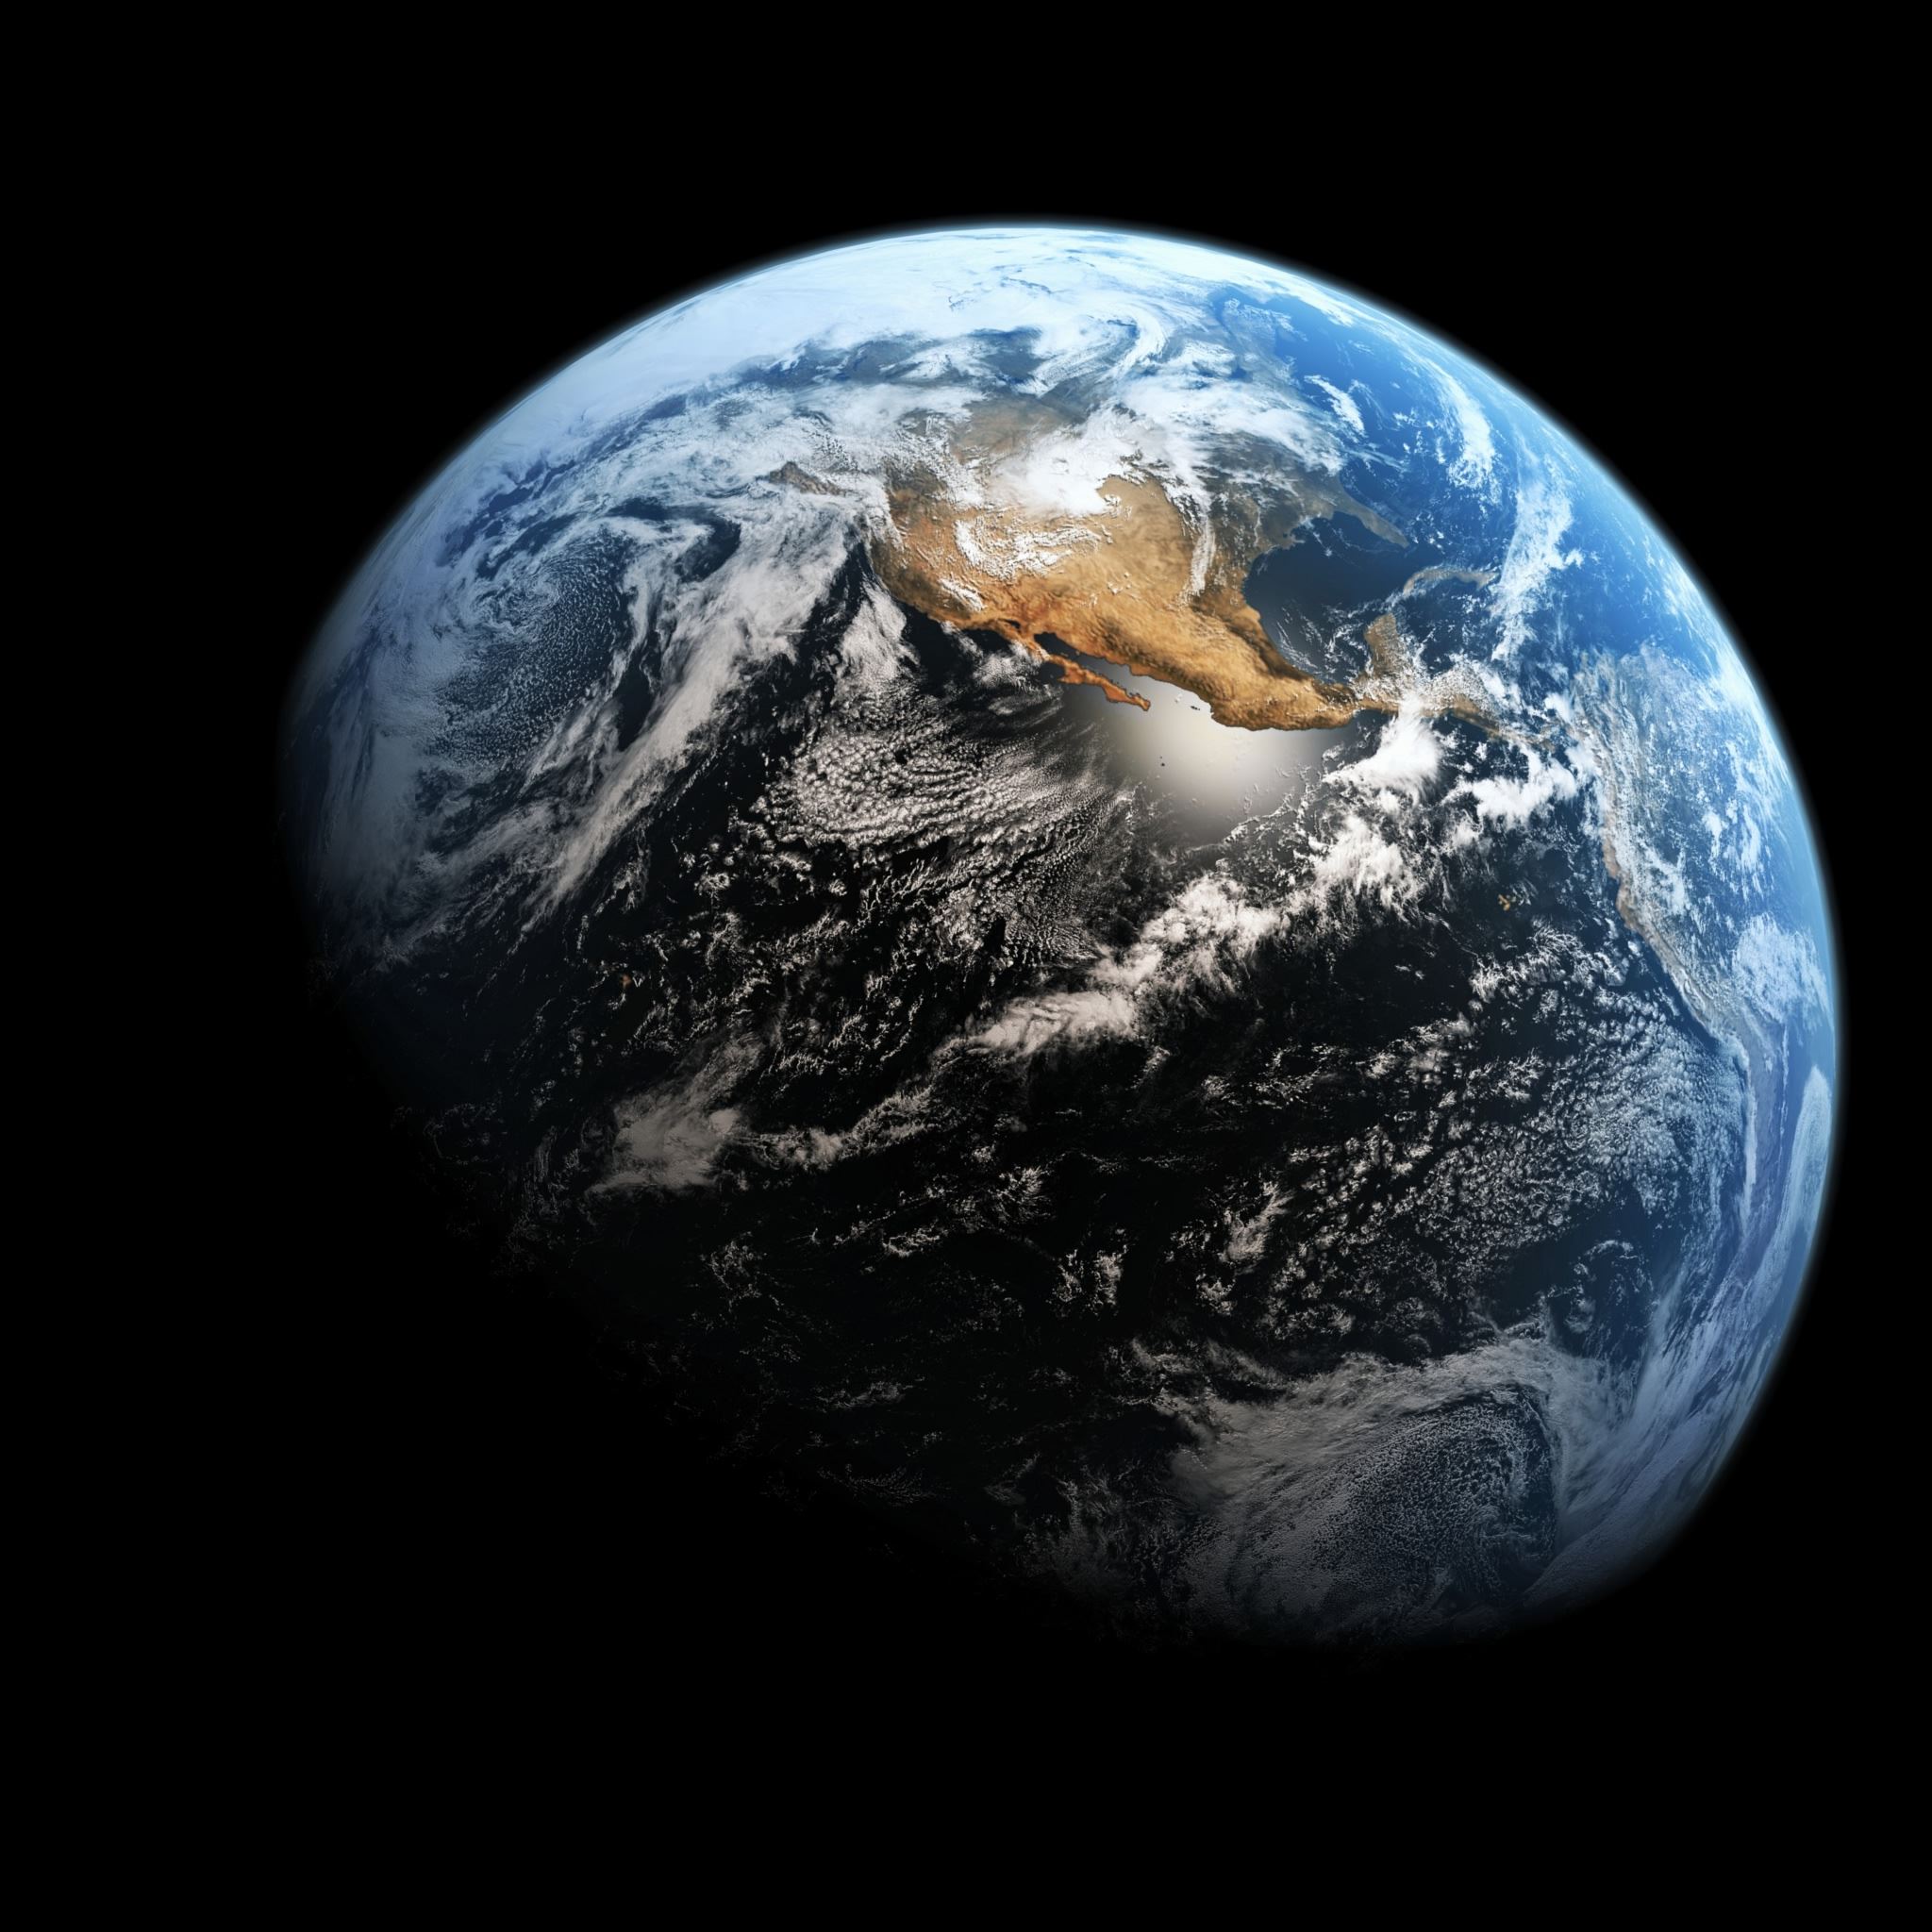 Earth with moon from space 4K wallpaper download